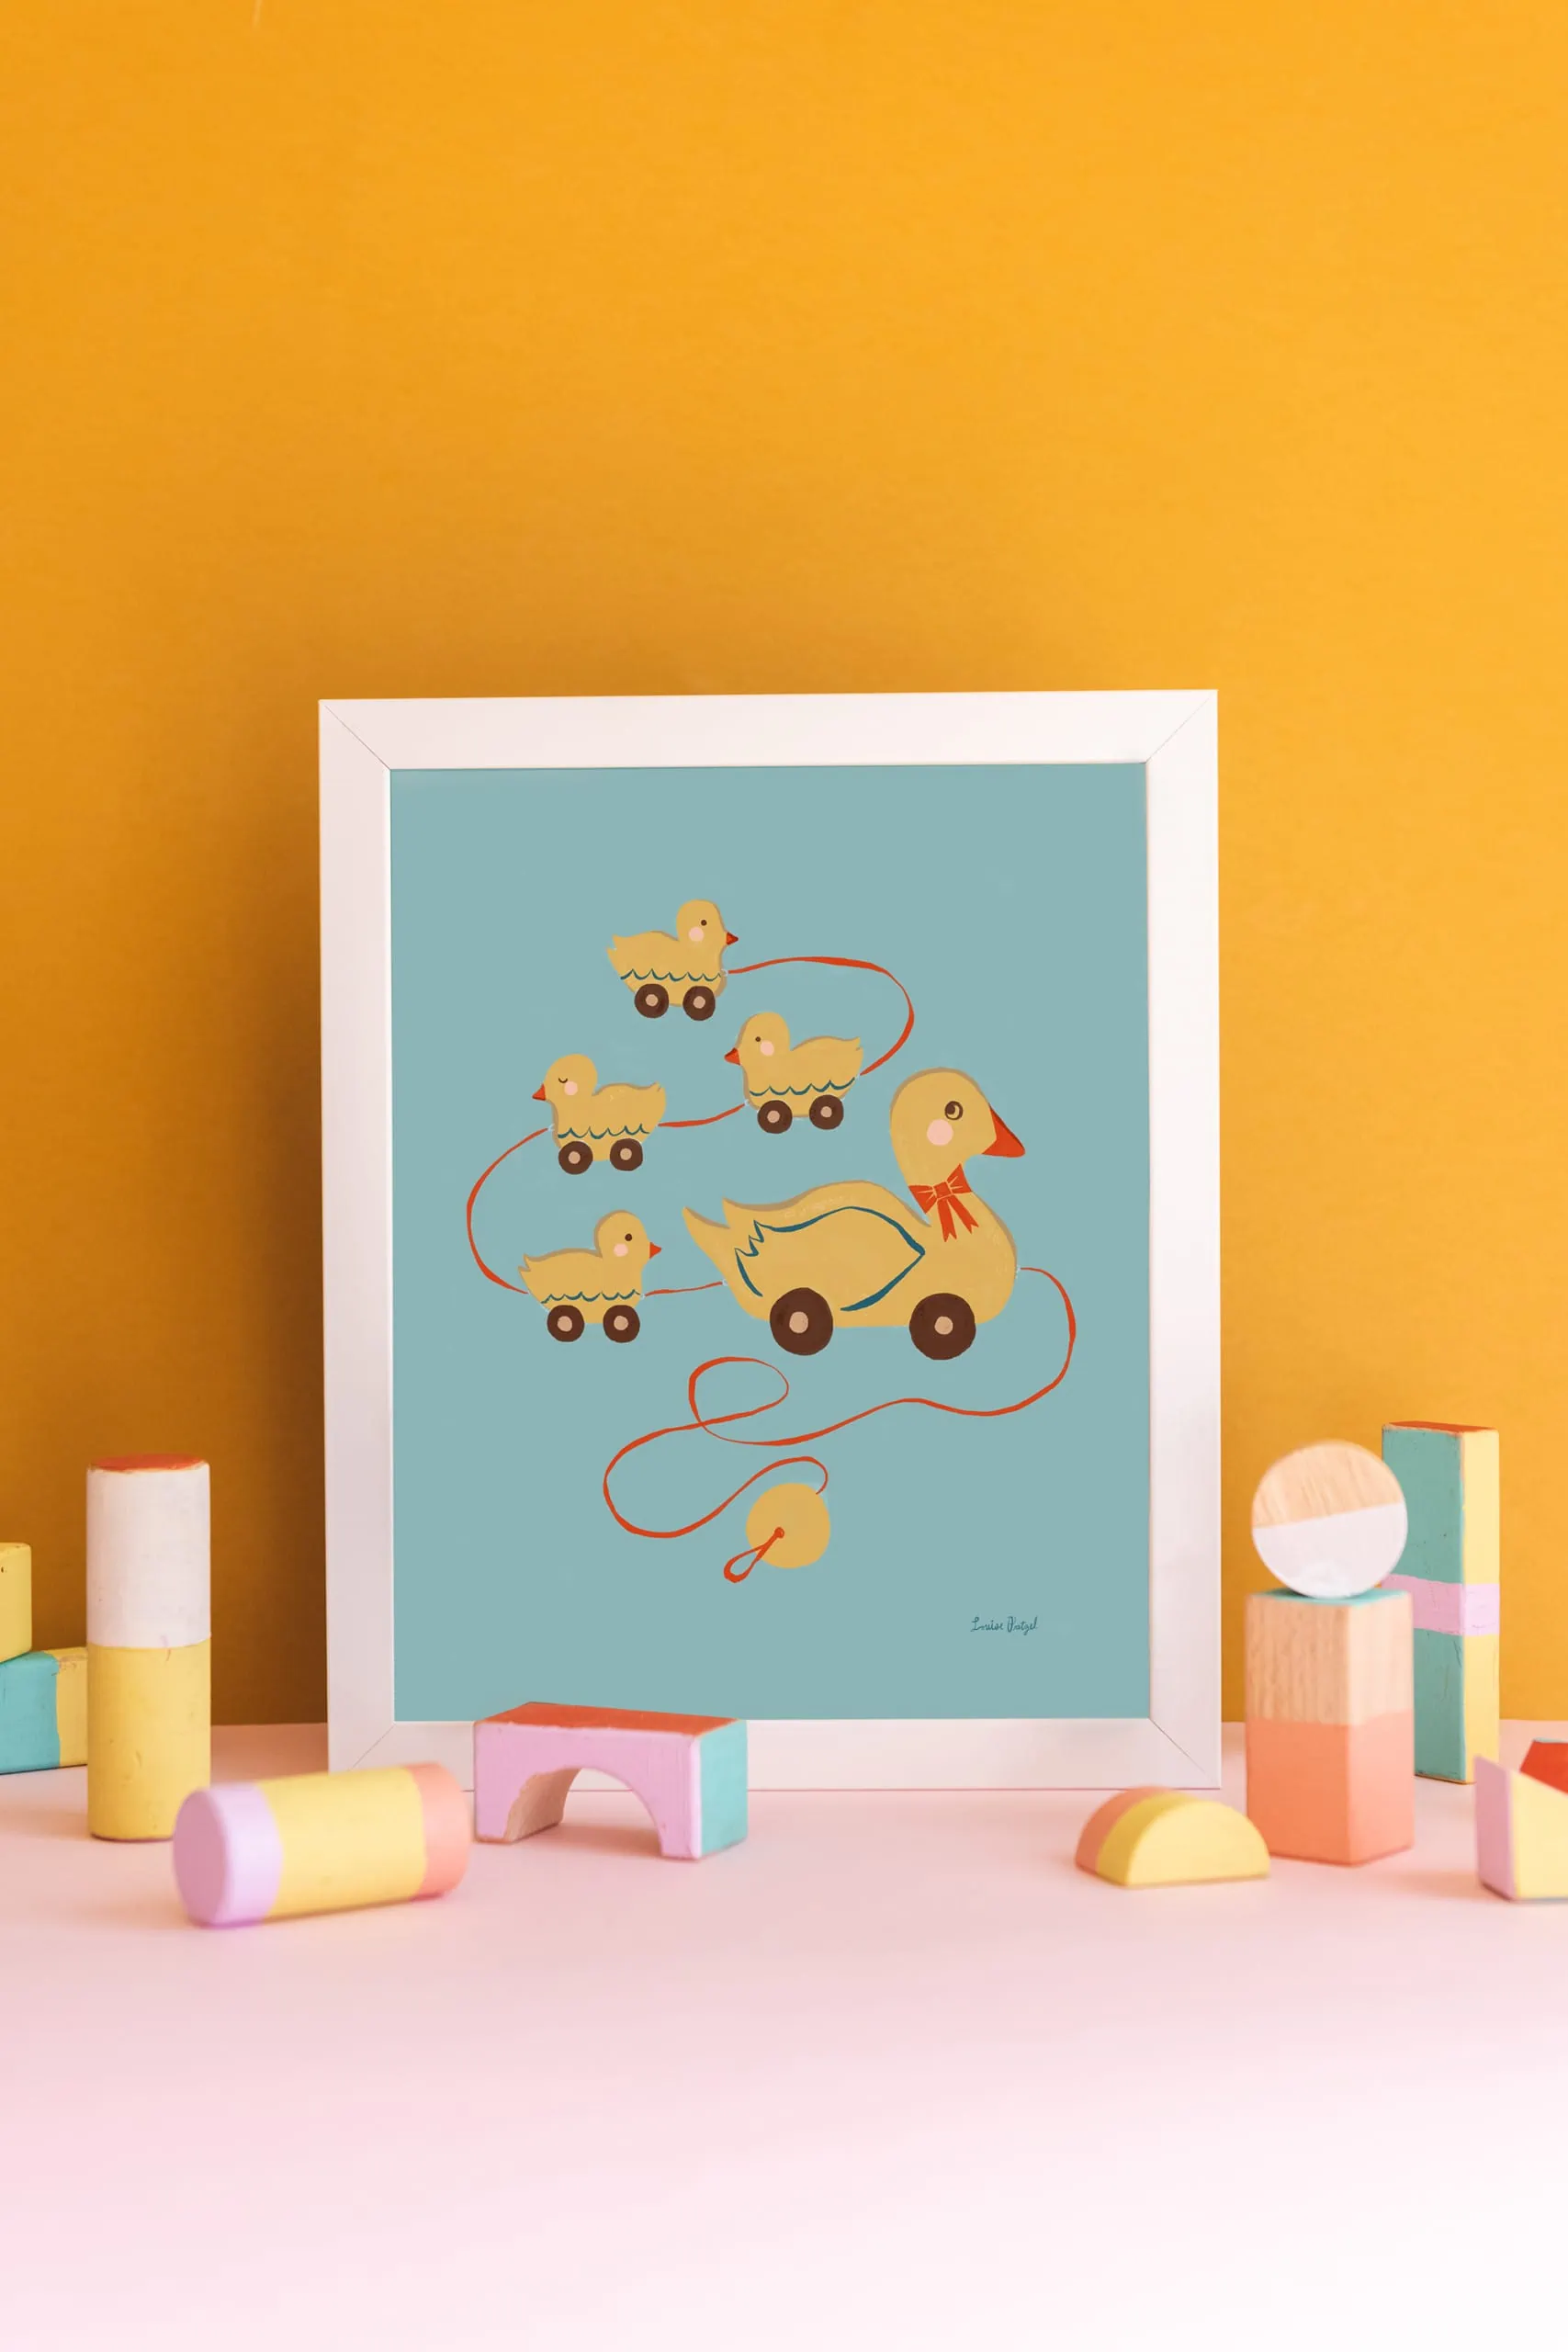 A print of Louise Pretzel's Pull Duck Toy against a gold background. Pastel wooden block toys are arranged in front.